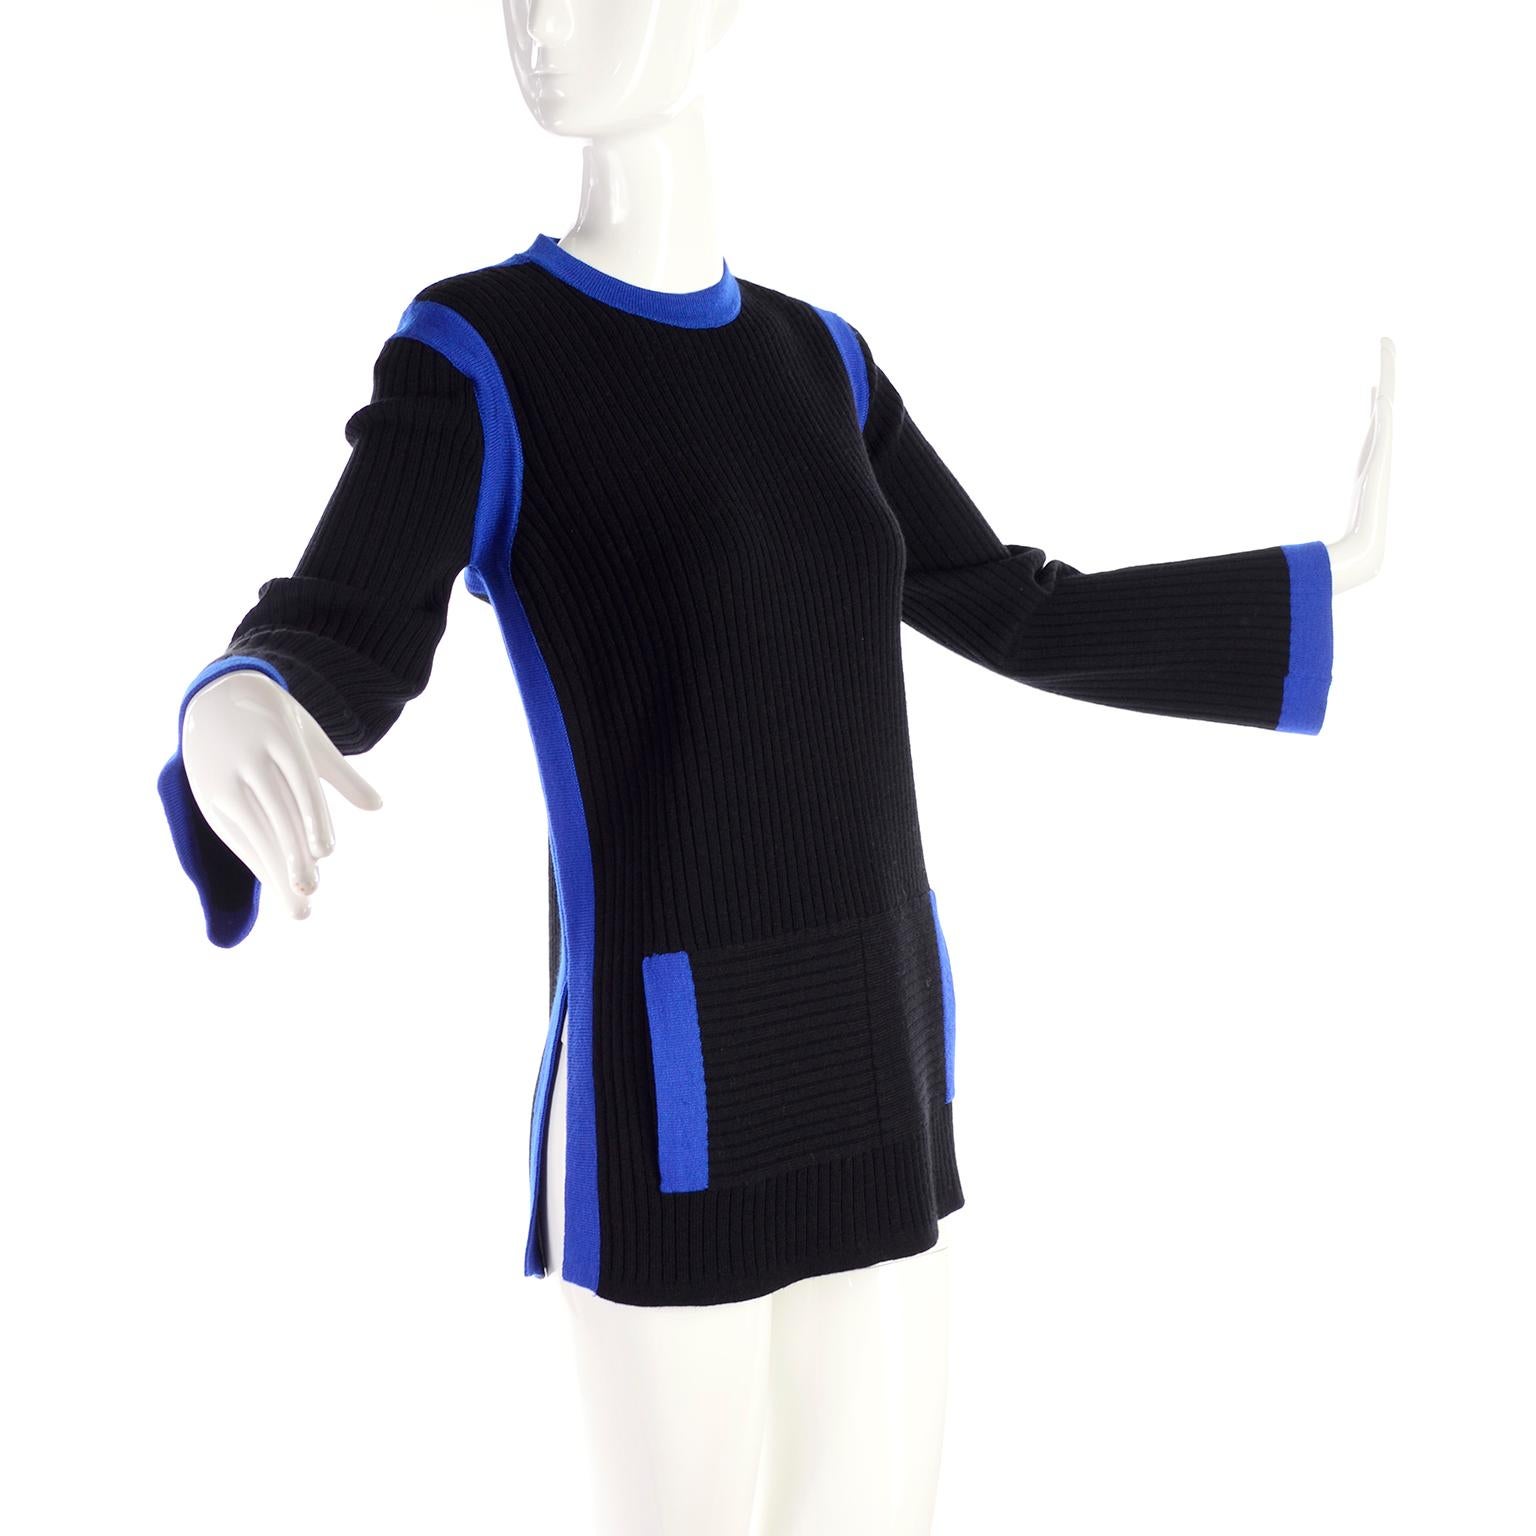 This is a wonderful vintage sweater from Yves Saint Laurent in black wool knit with pretty blue trim. There are buttons on the shoulders, faux front pockets and side slits.  Labeled a size large, the top can fit a medium or a smaller large.  Made in